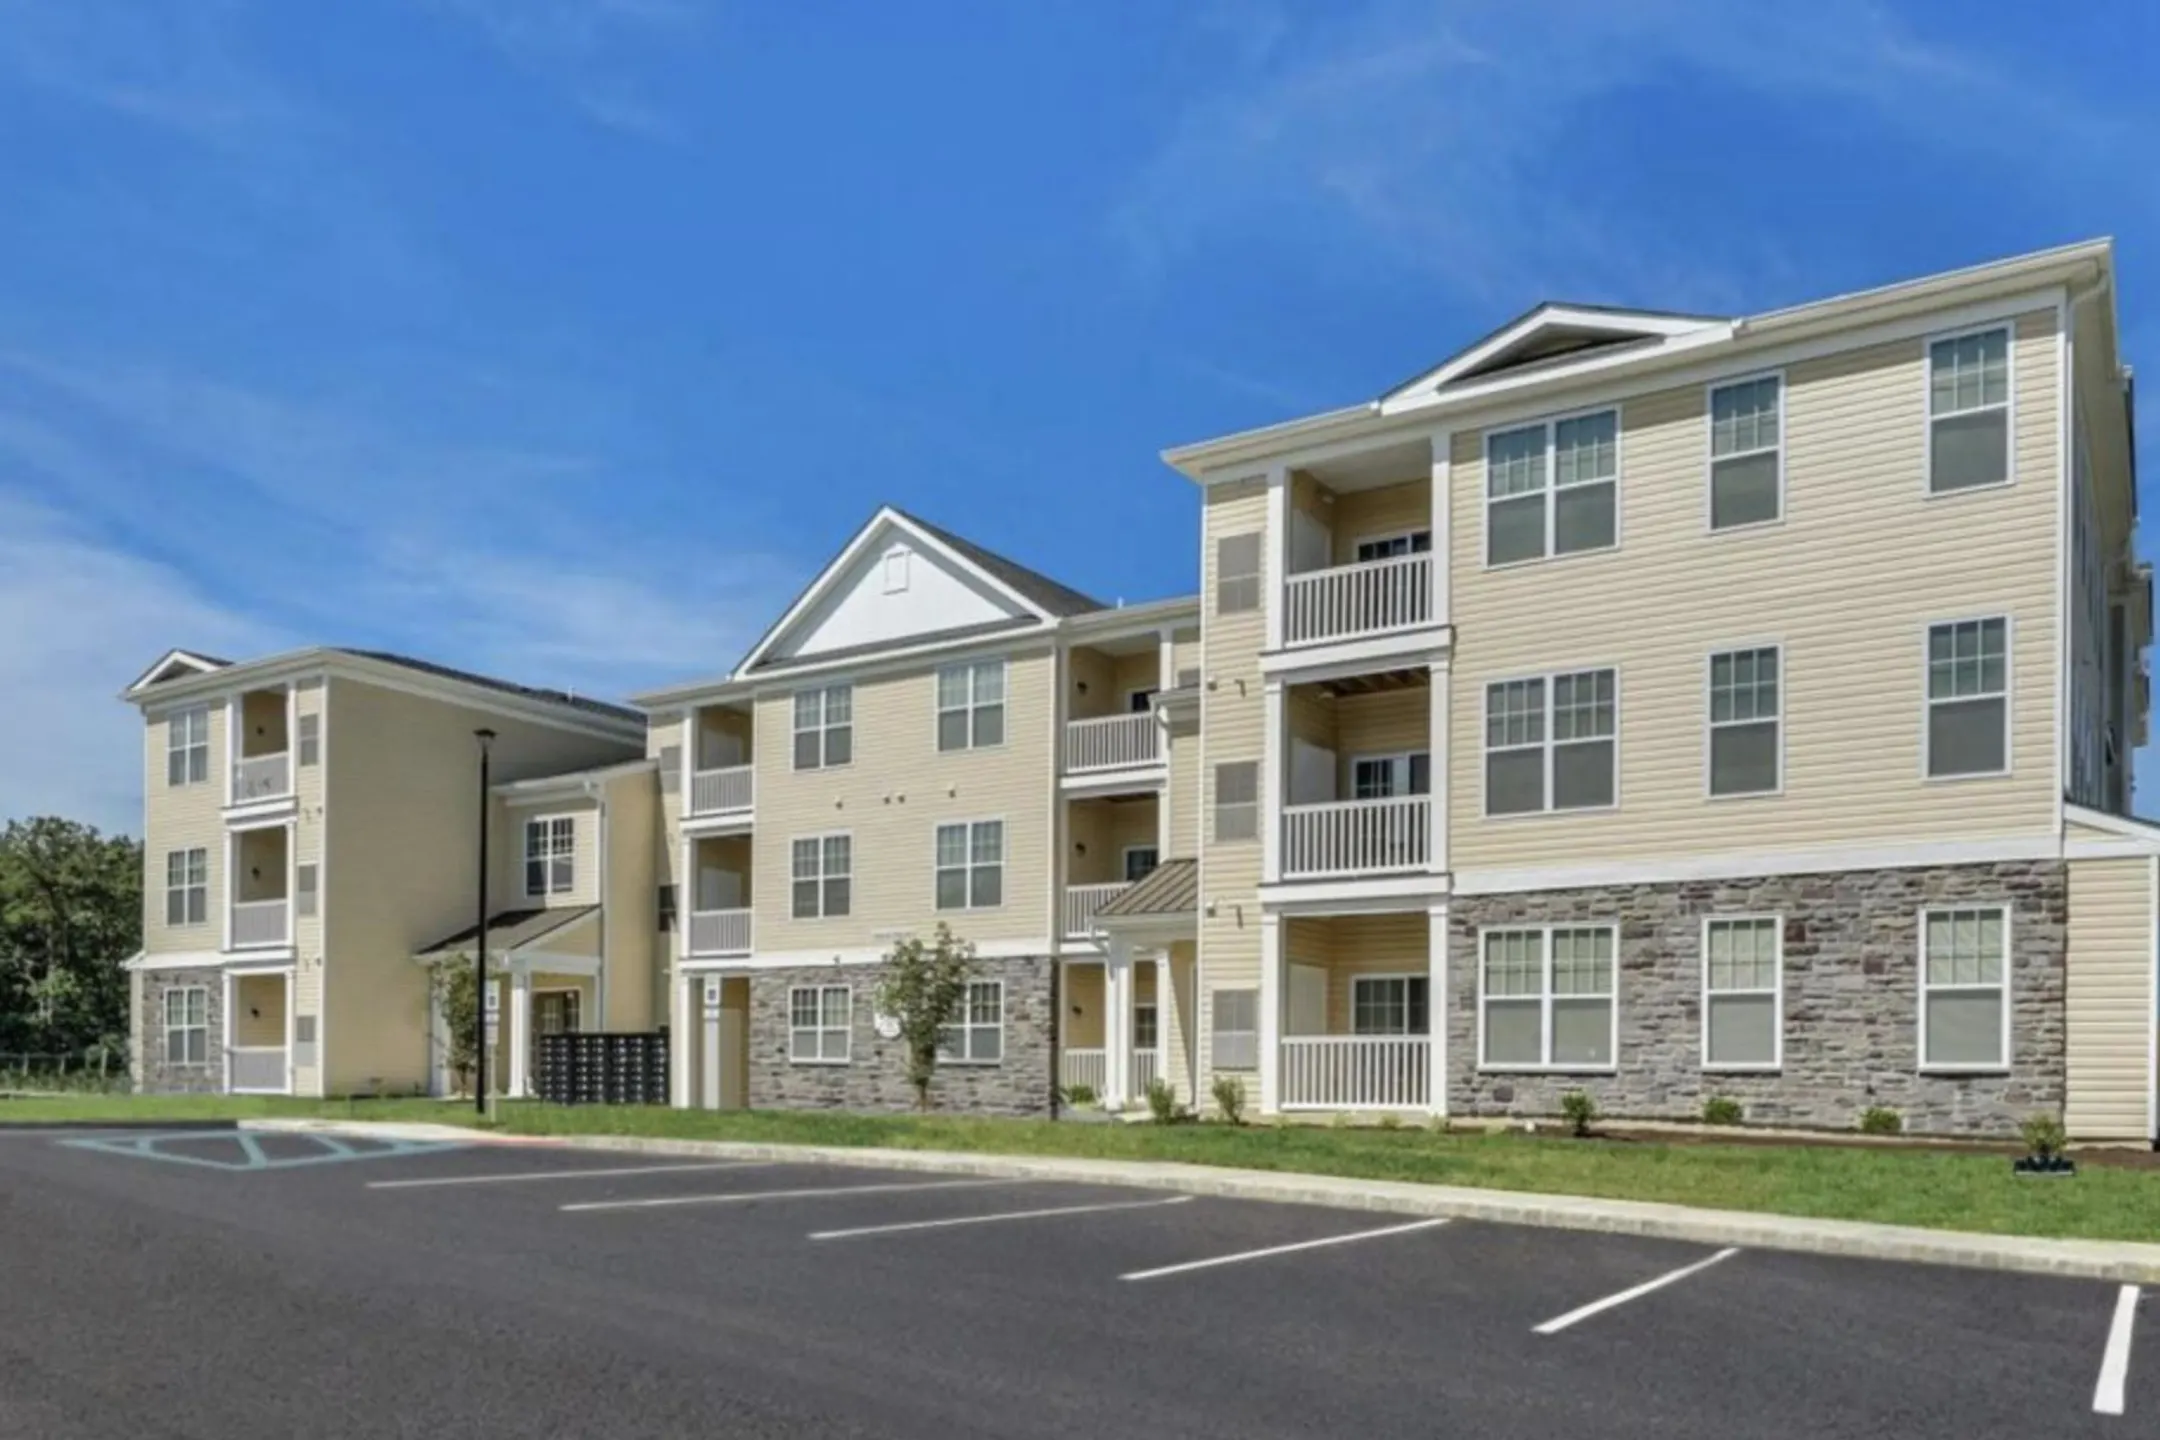 Building - 55+ Living Mi-Place at the Shore - Absecon, NJ